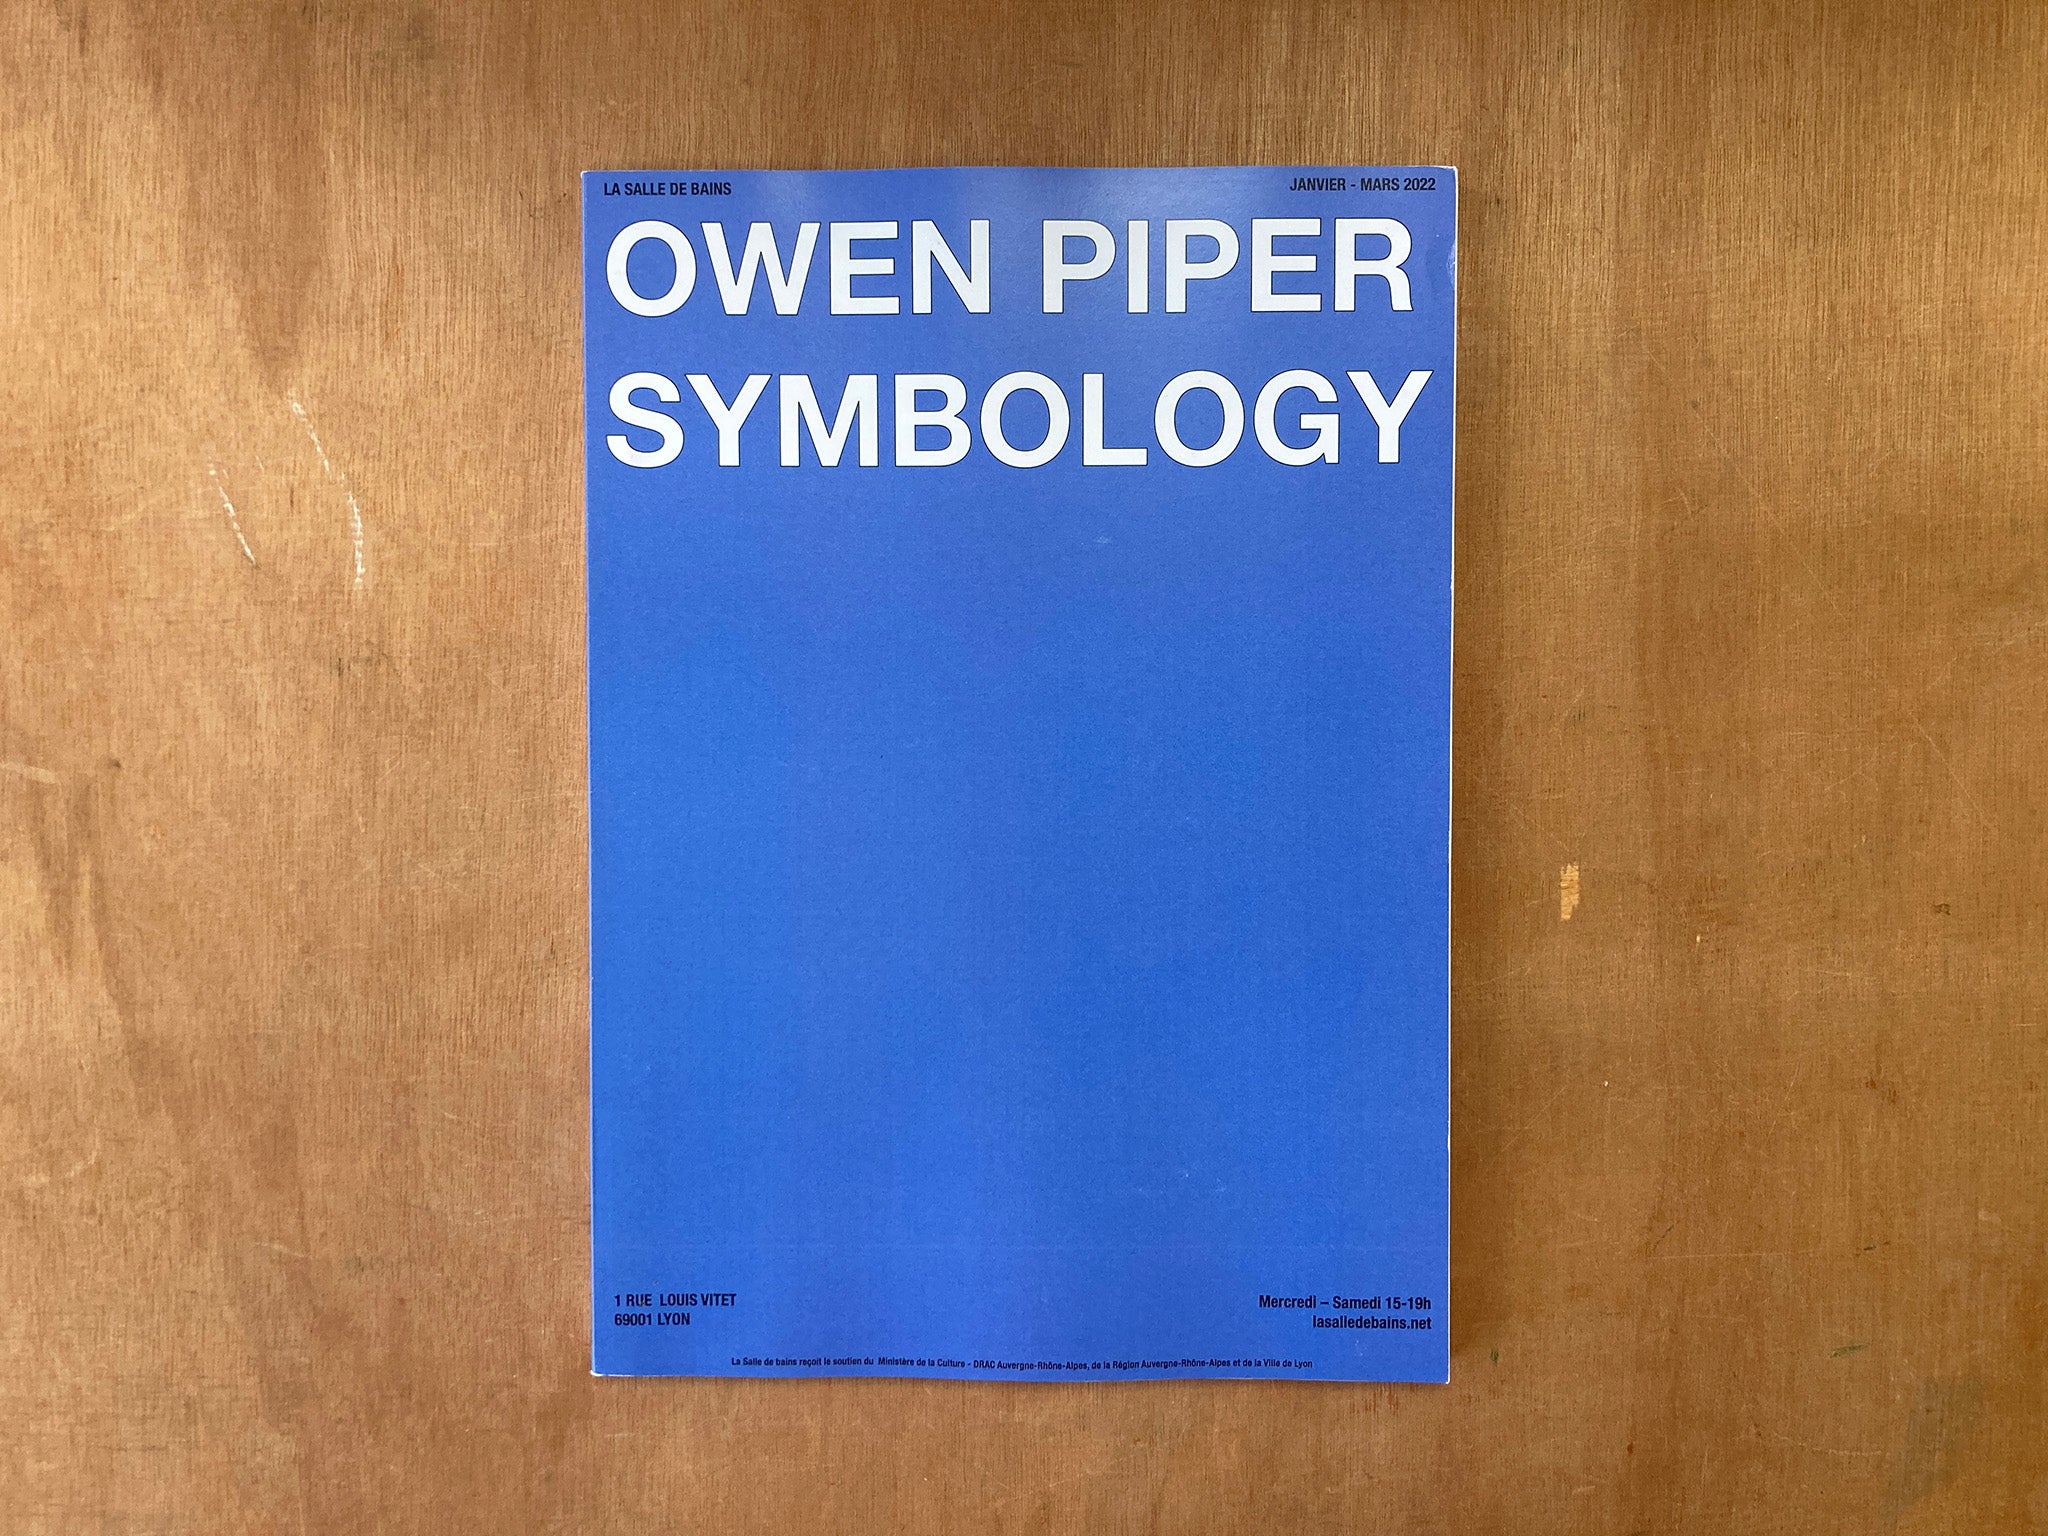 SYMBOLOGY by Owen Piper